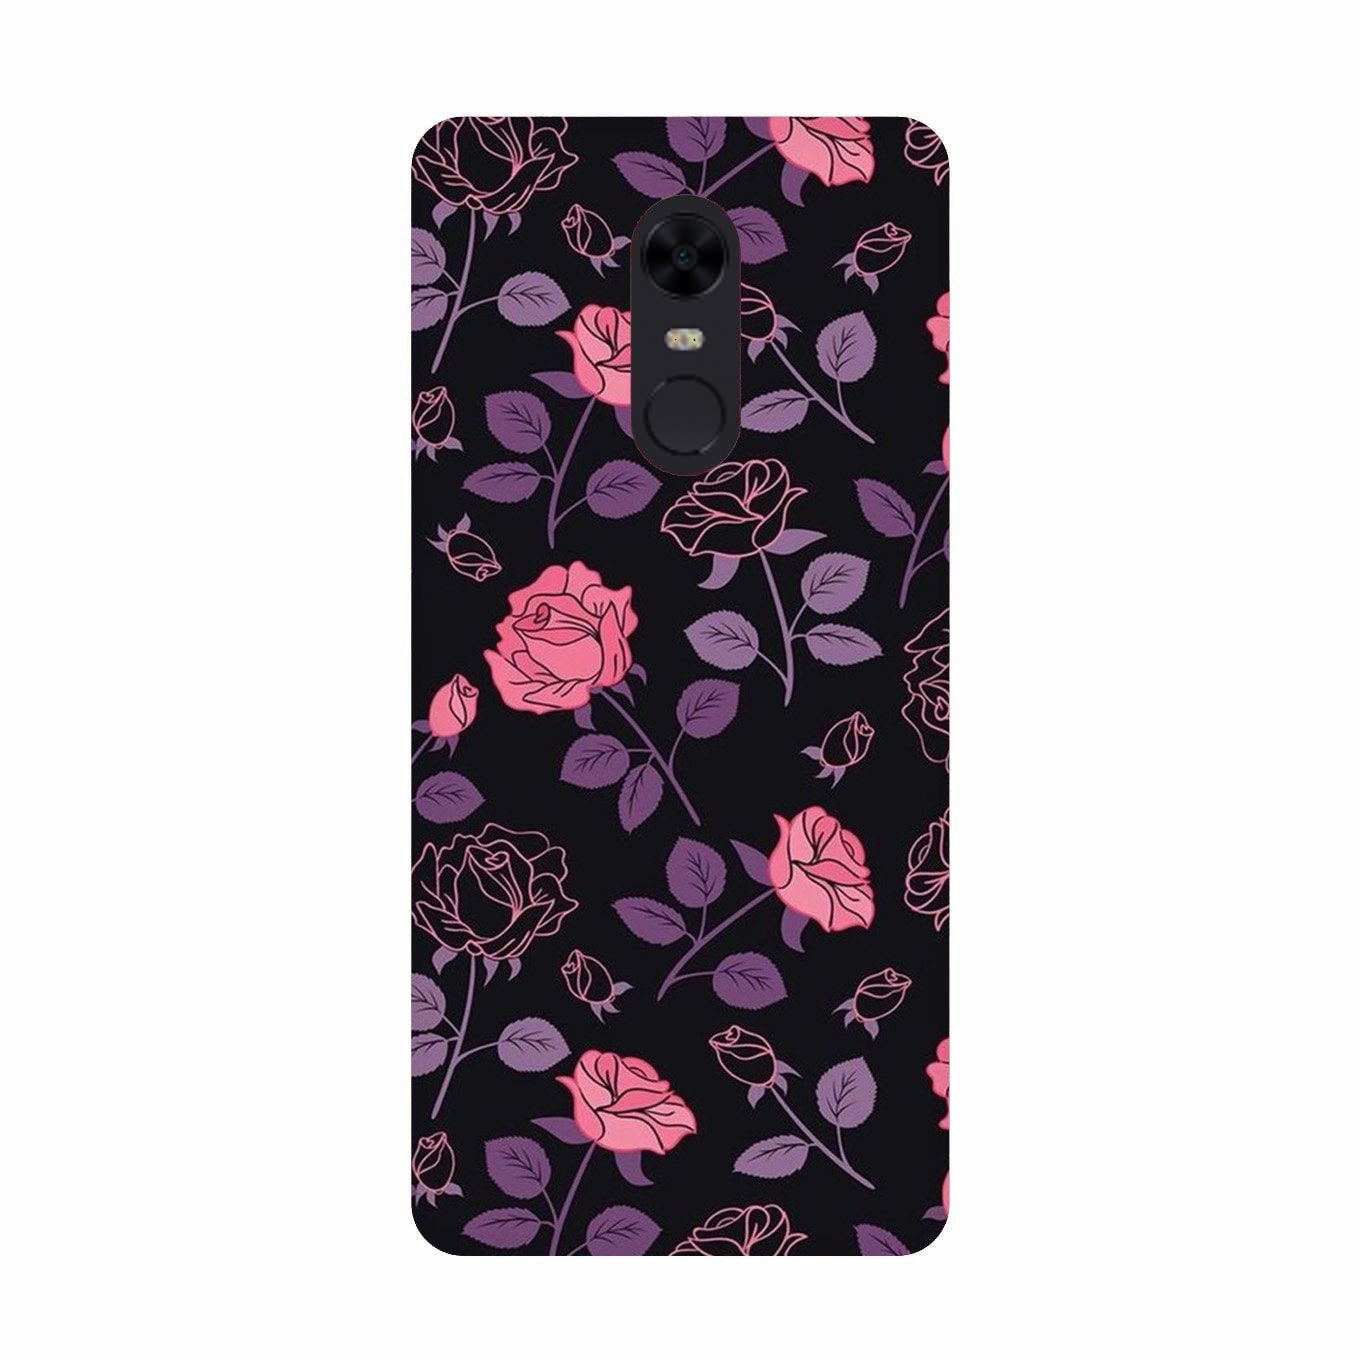 Rose Pattern Case for Redmi 5